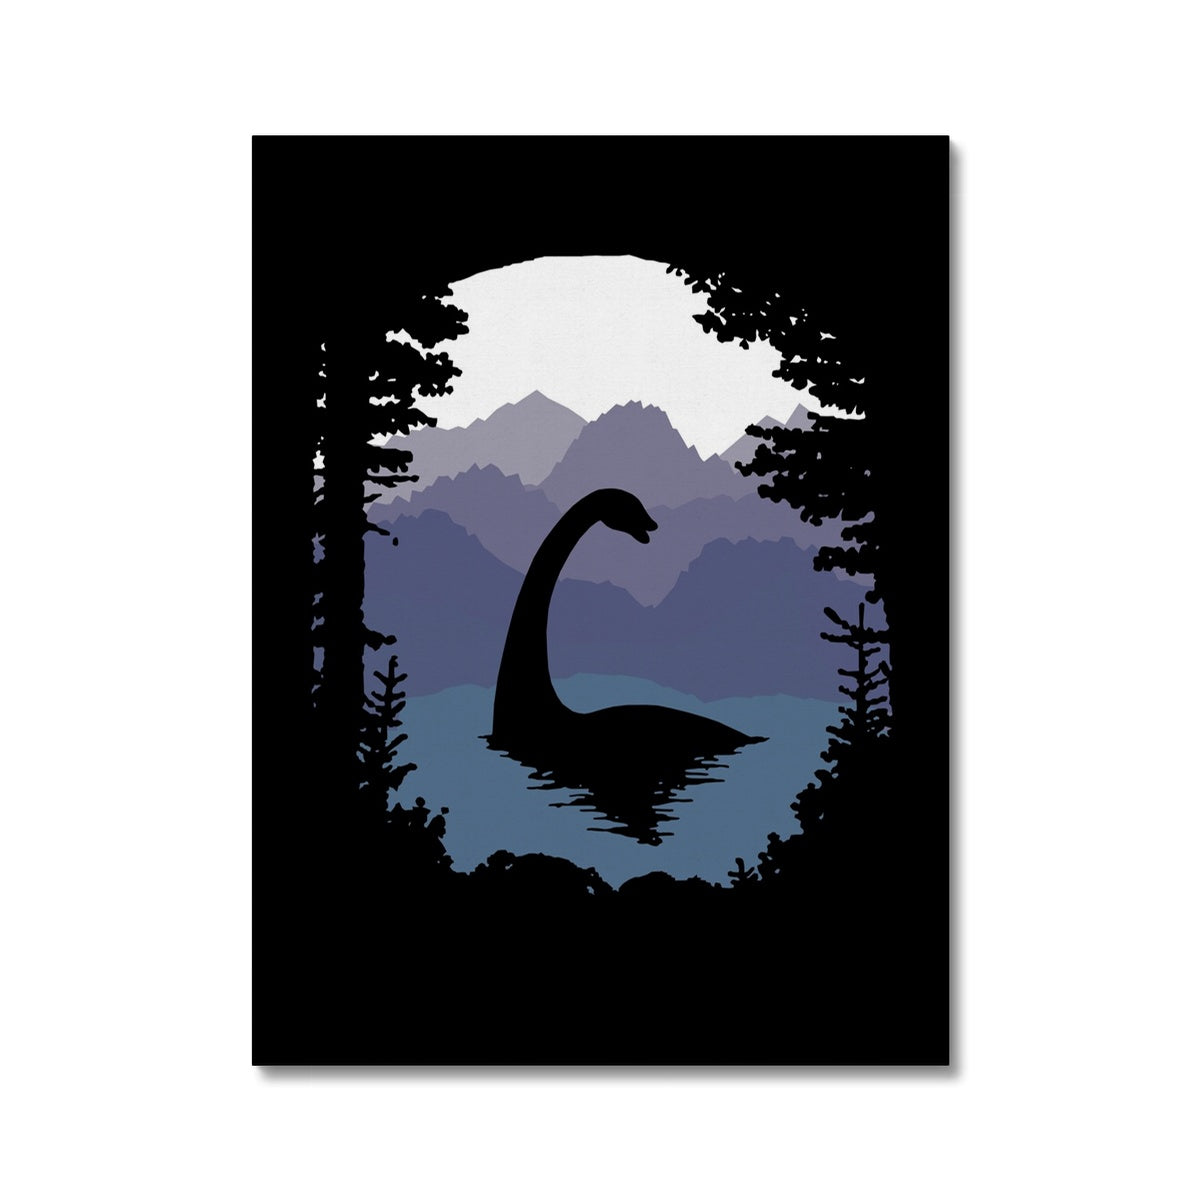 Shadow Of A Loch Ness Monster, Illustration Canvas